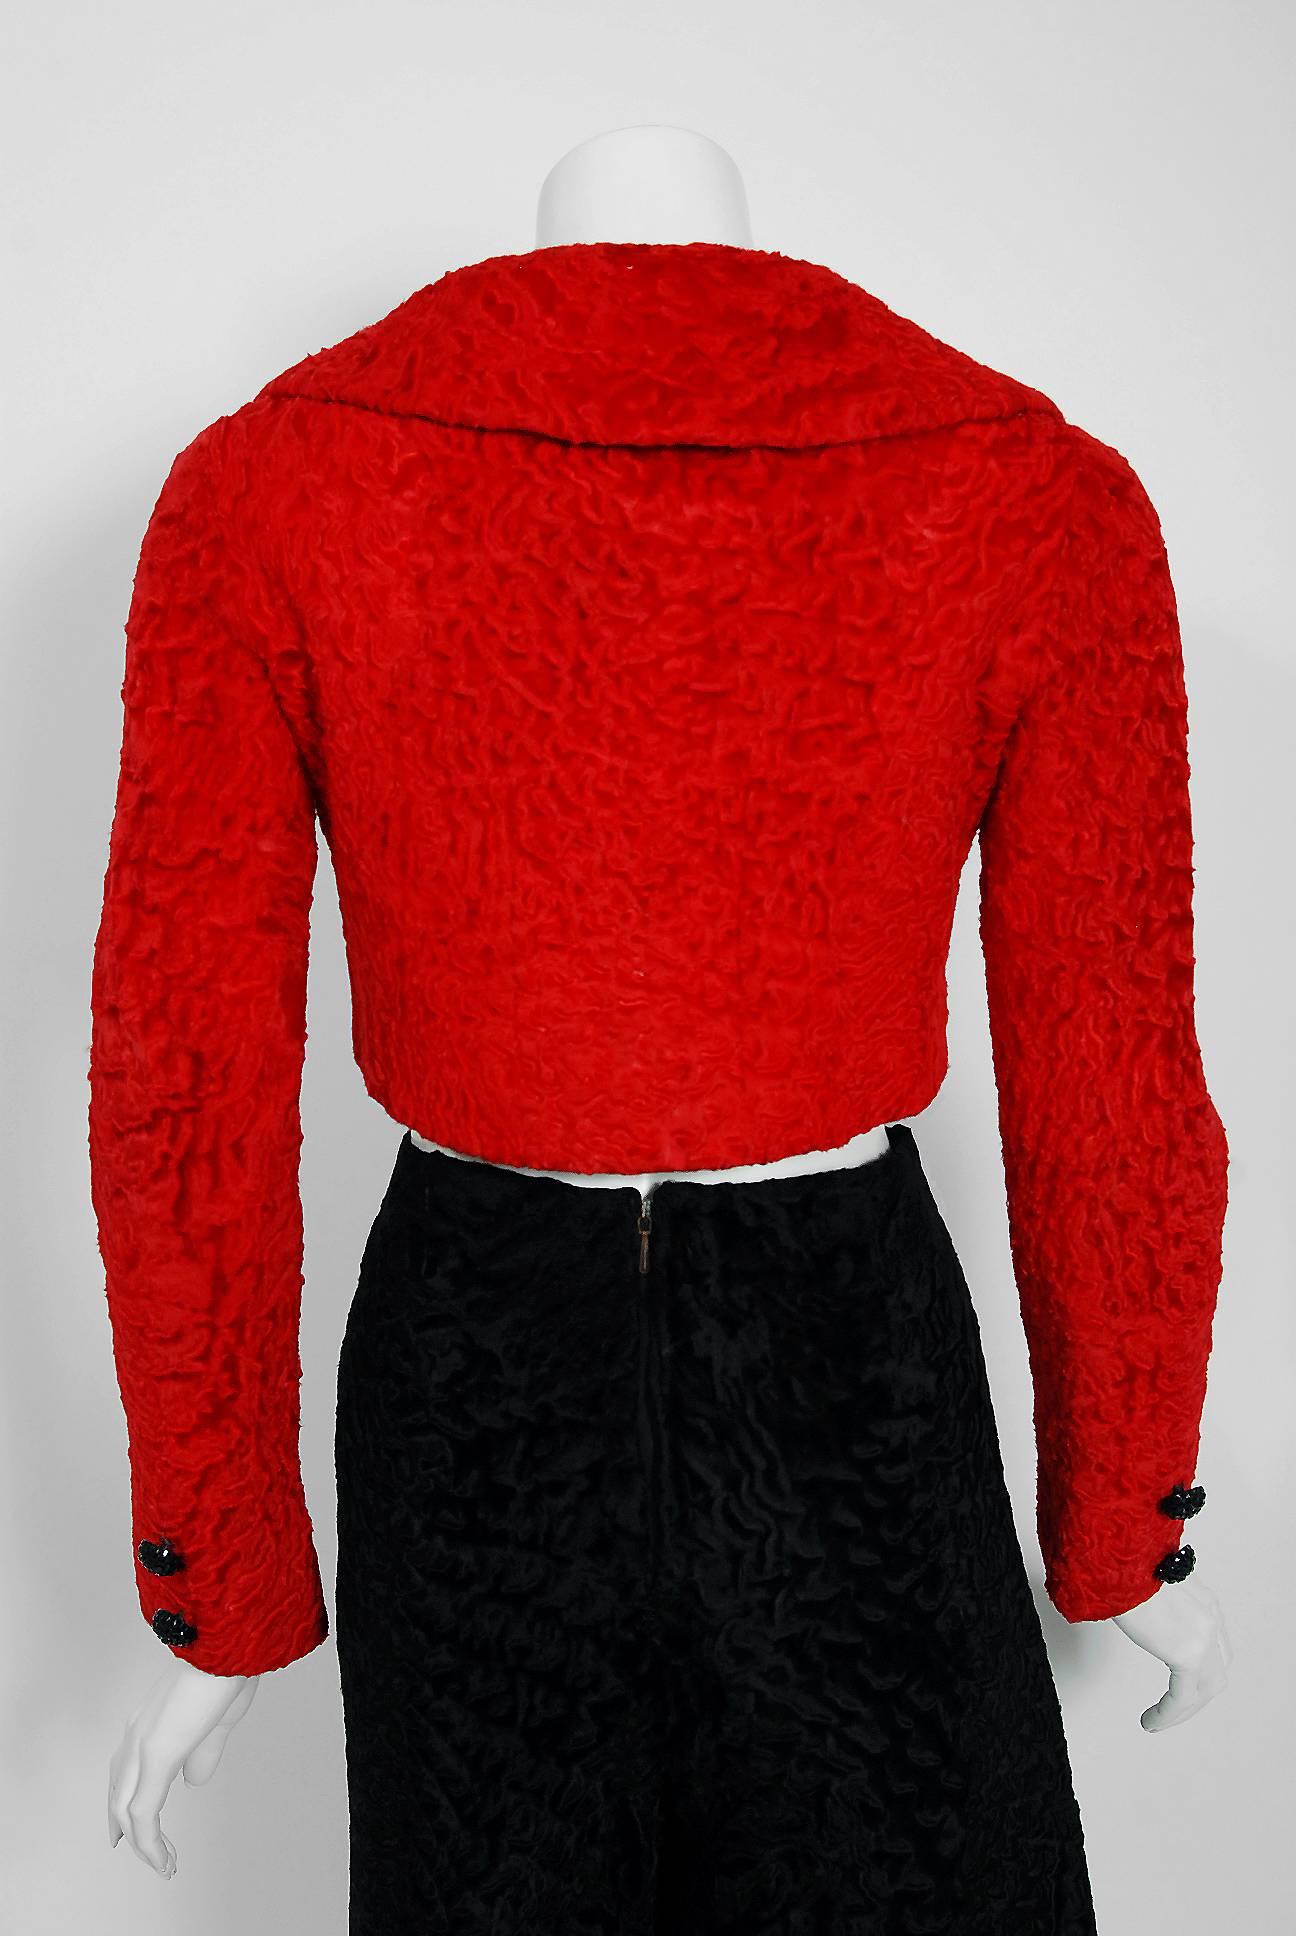 Vintage 1960s Christian Dior Couture Red Black Broadtail Jacket and Gaucho Pants 2